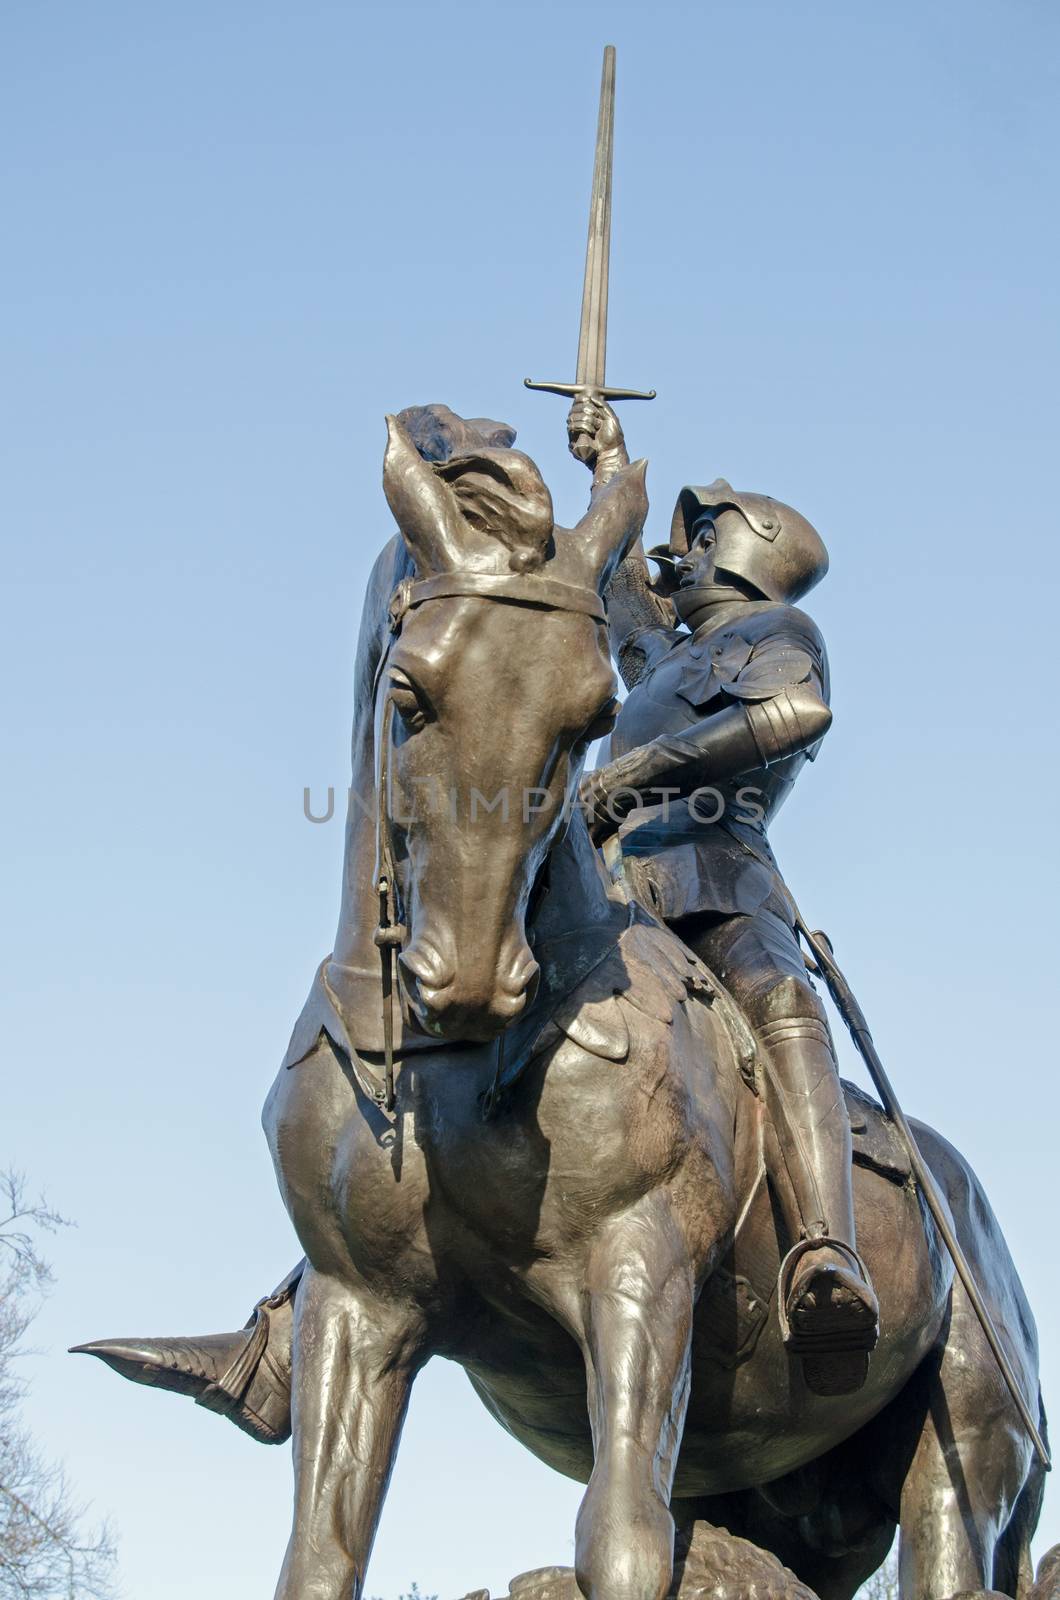 St George Statue, Cavalry Monument by BasPhoto